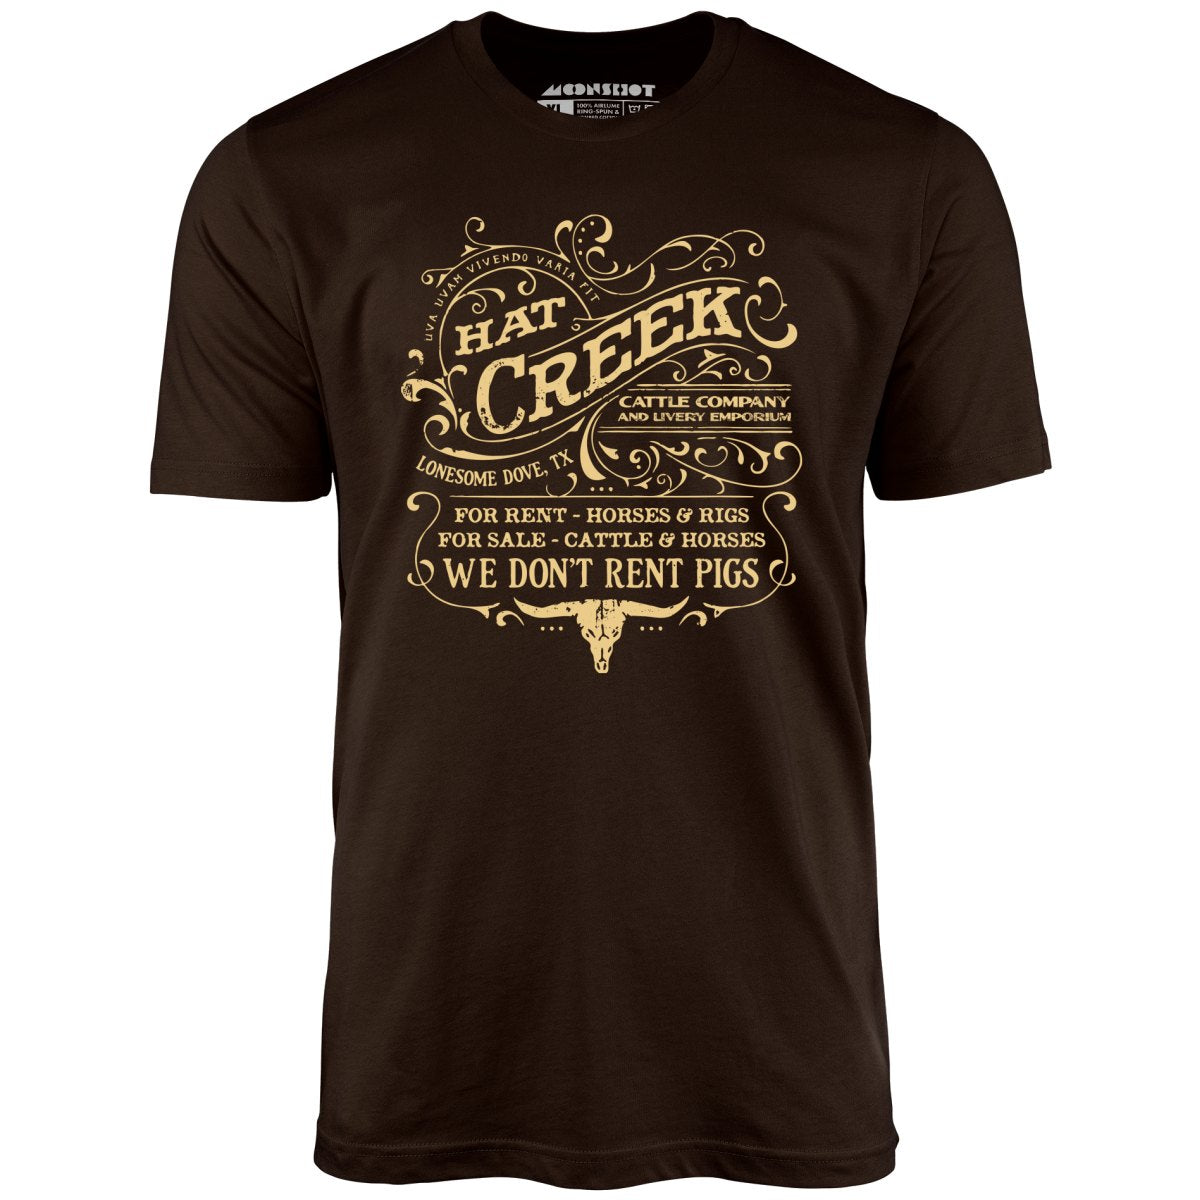 Image of Hat Creek Cattle Company - Lonesome Dove, TX - Unisex T-Shirt